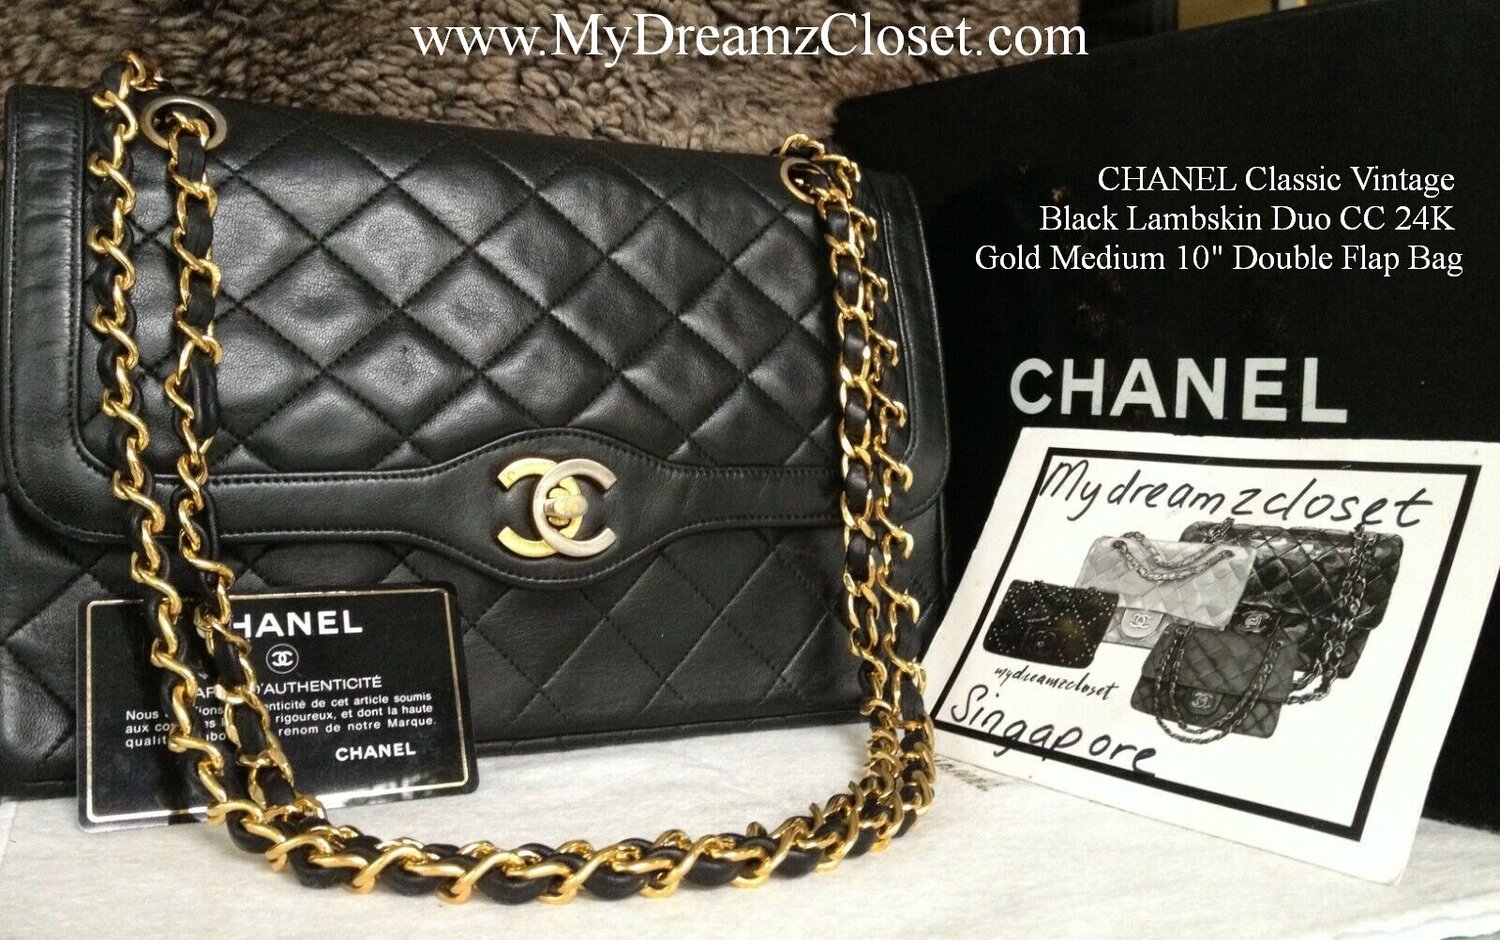 Unboxing my new Chanel Double Flap Bag ✨ Vintage Chanel Classic